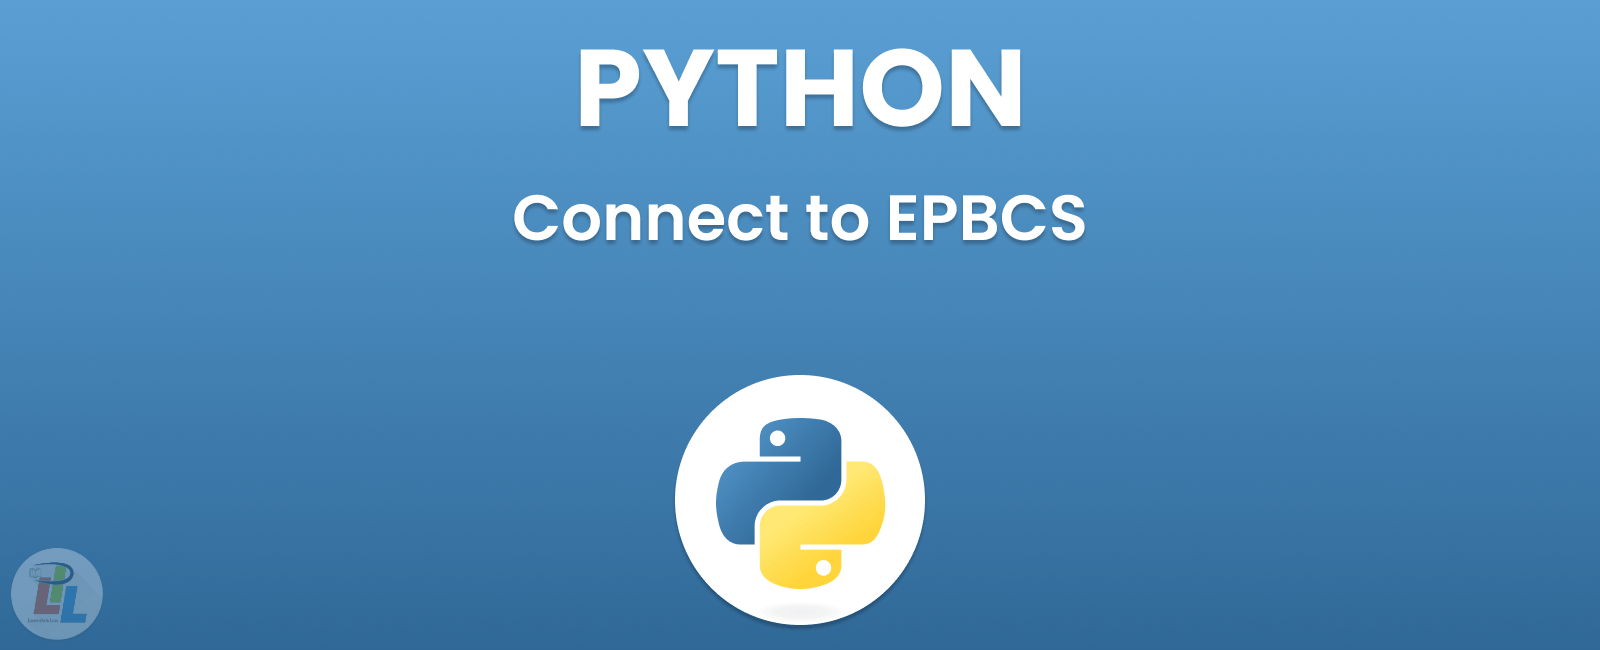 Python Code to Connect to EPBCS: Simplifying Cloud Integration